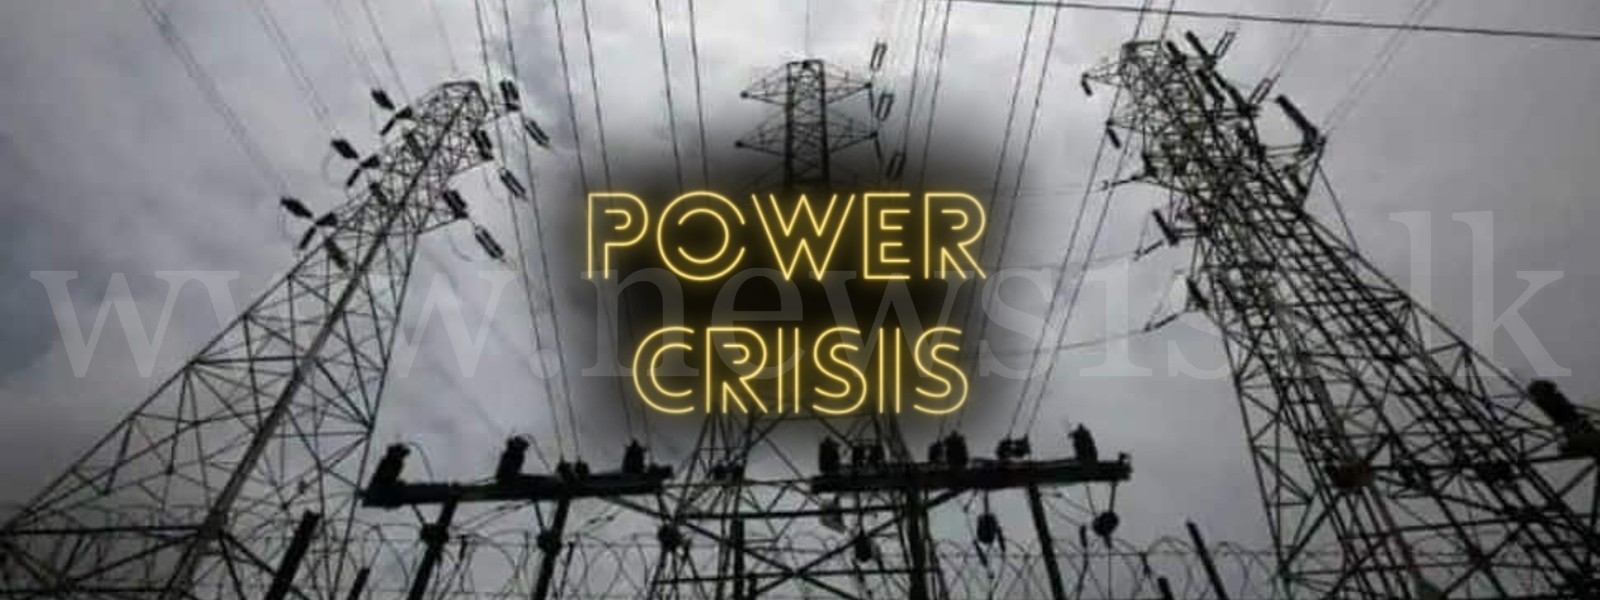 Sri Lanka’s Power Crisis: PUCSL says NO to power cuts, but CEB goes ahead